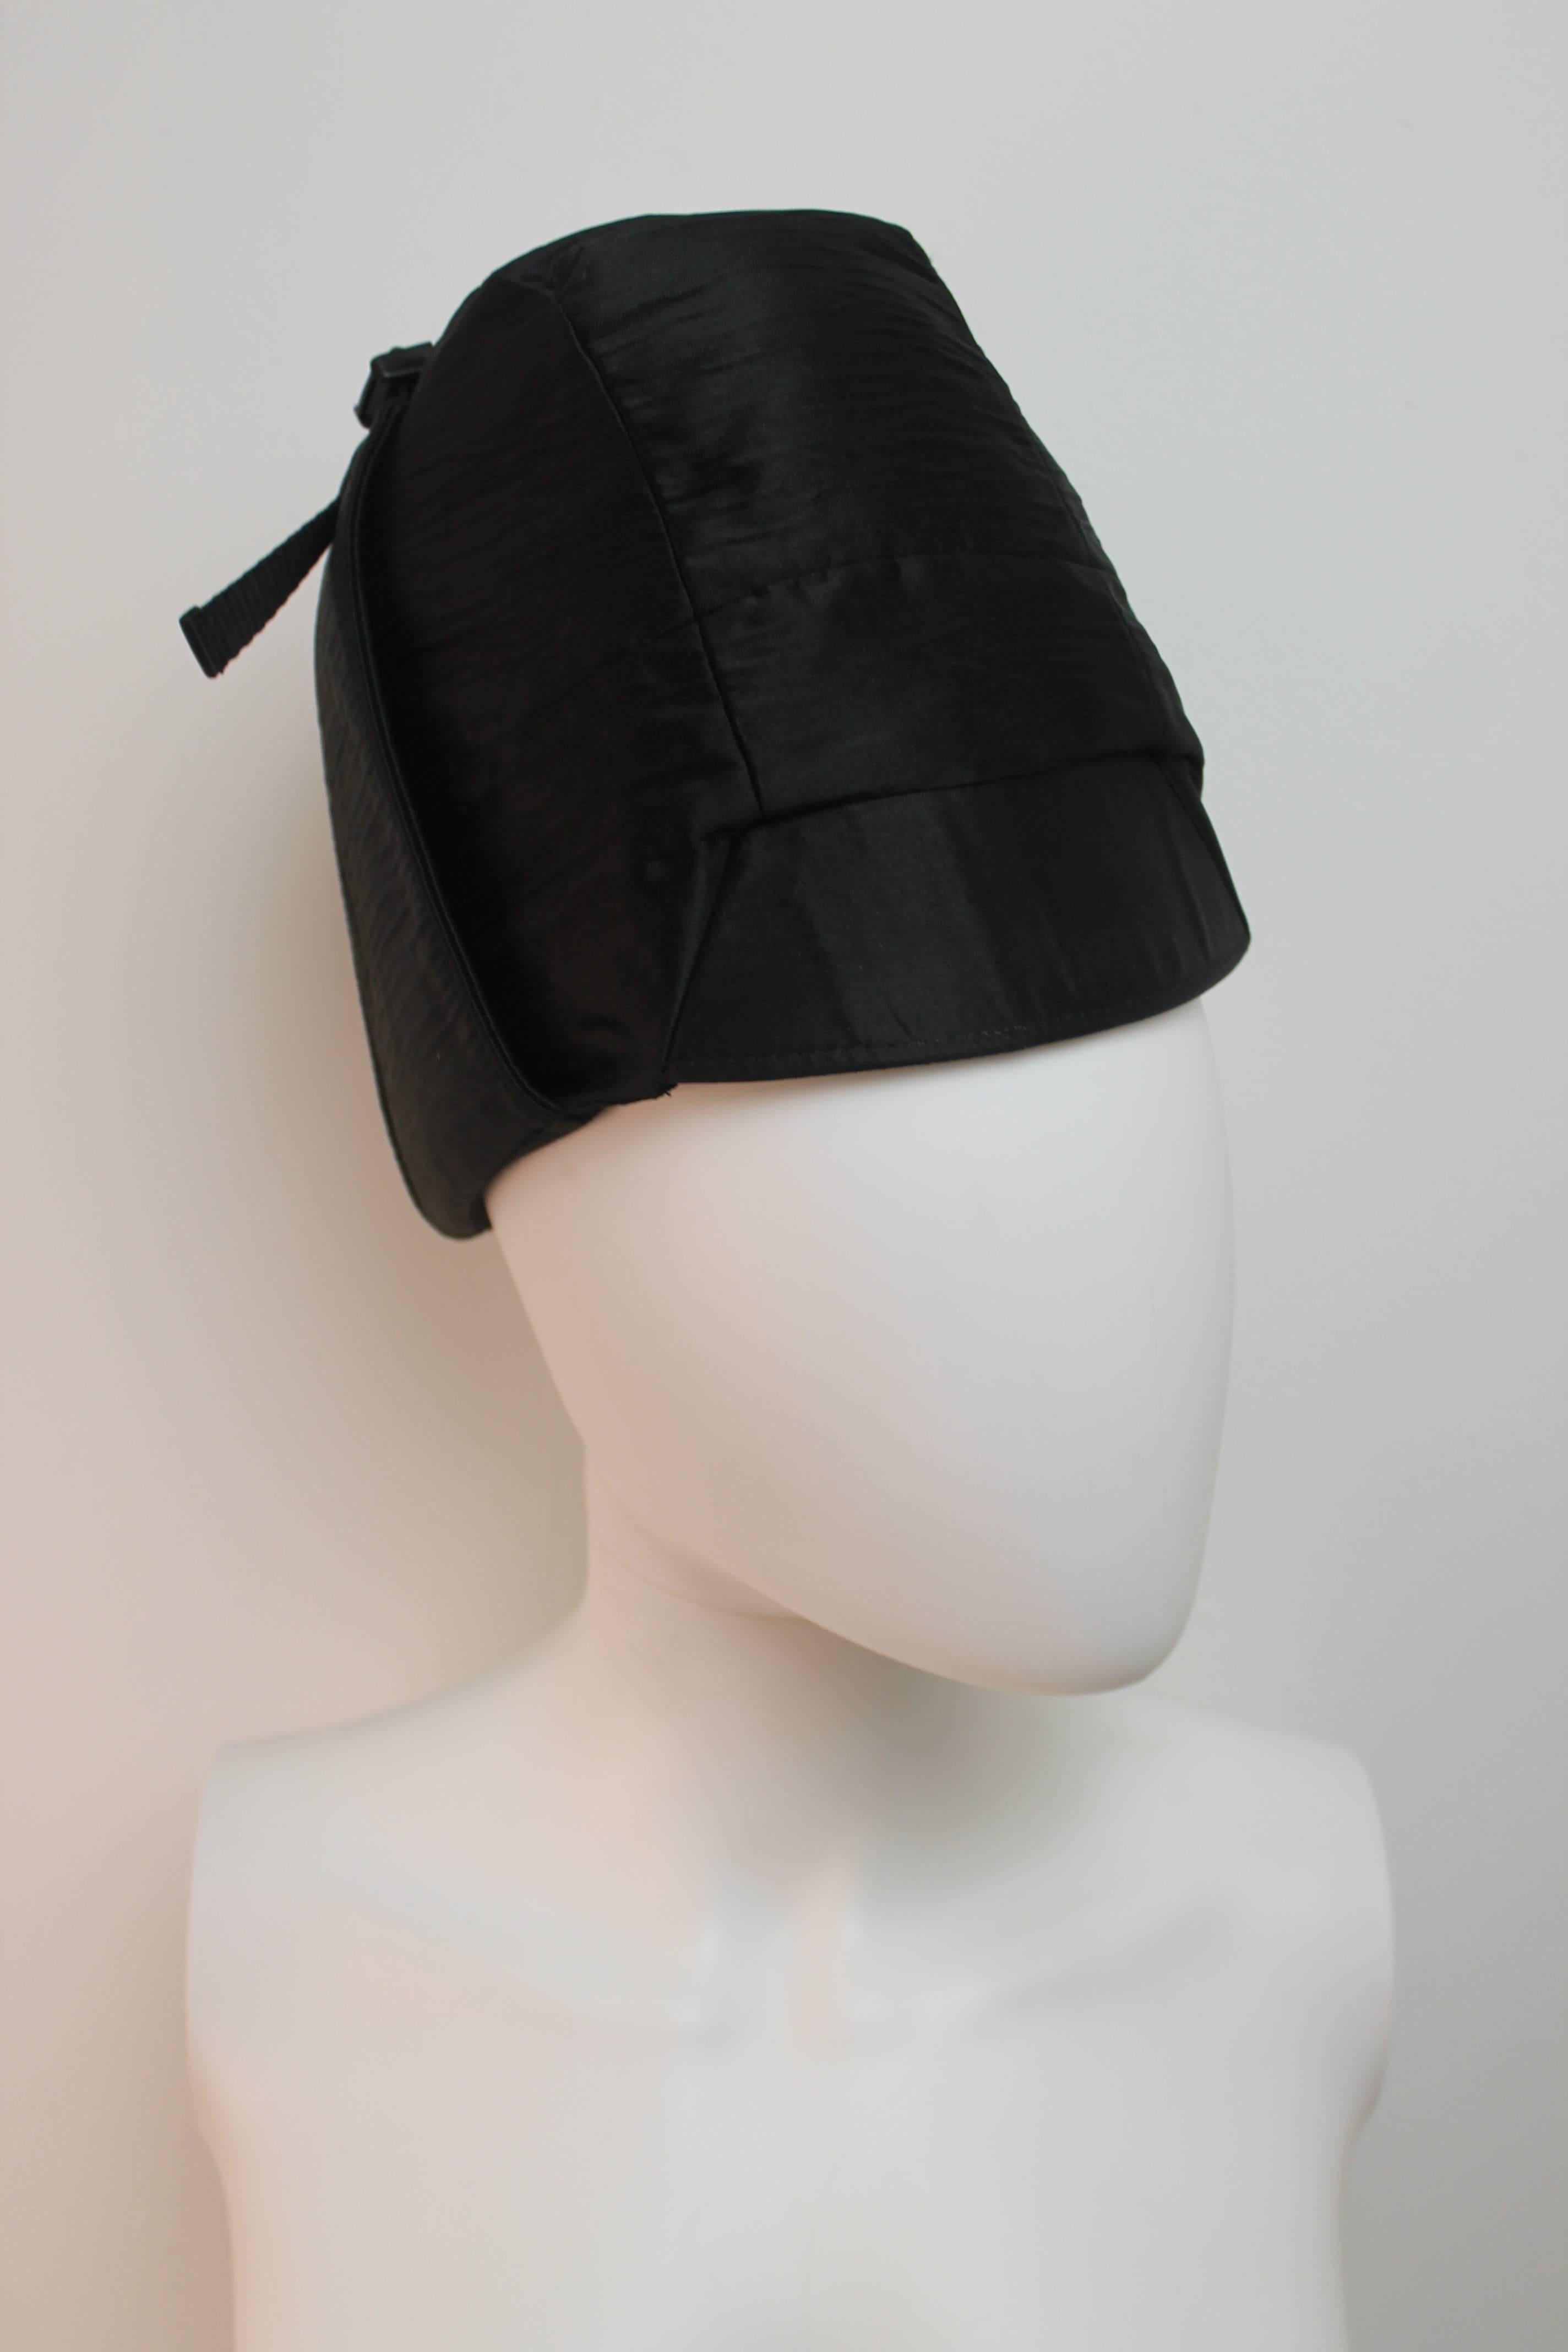 Luxurious Prada black hat with two wind straps and silver fastening under the chin.